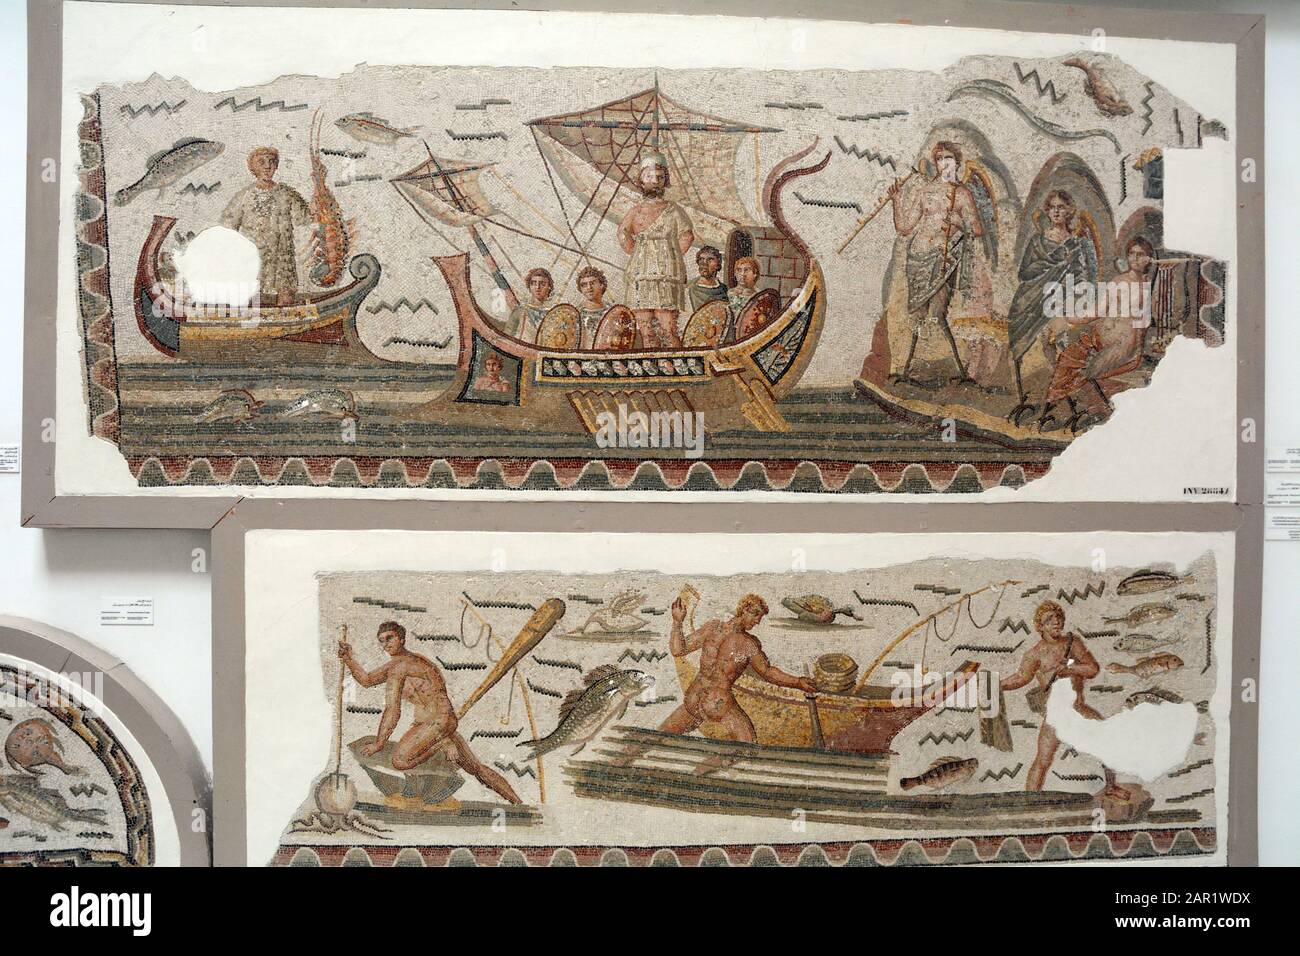 An ancient Roman mosaic from the 3rd century AD depicting Ulysses and his crew enduring the song of the sirens, Bardo National Museum, Tunis, Tunisia. Stock Photo